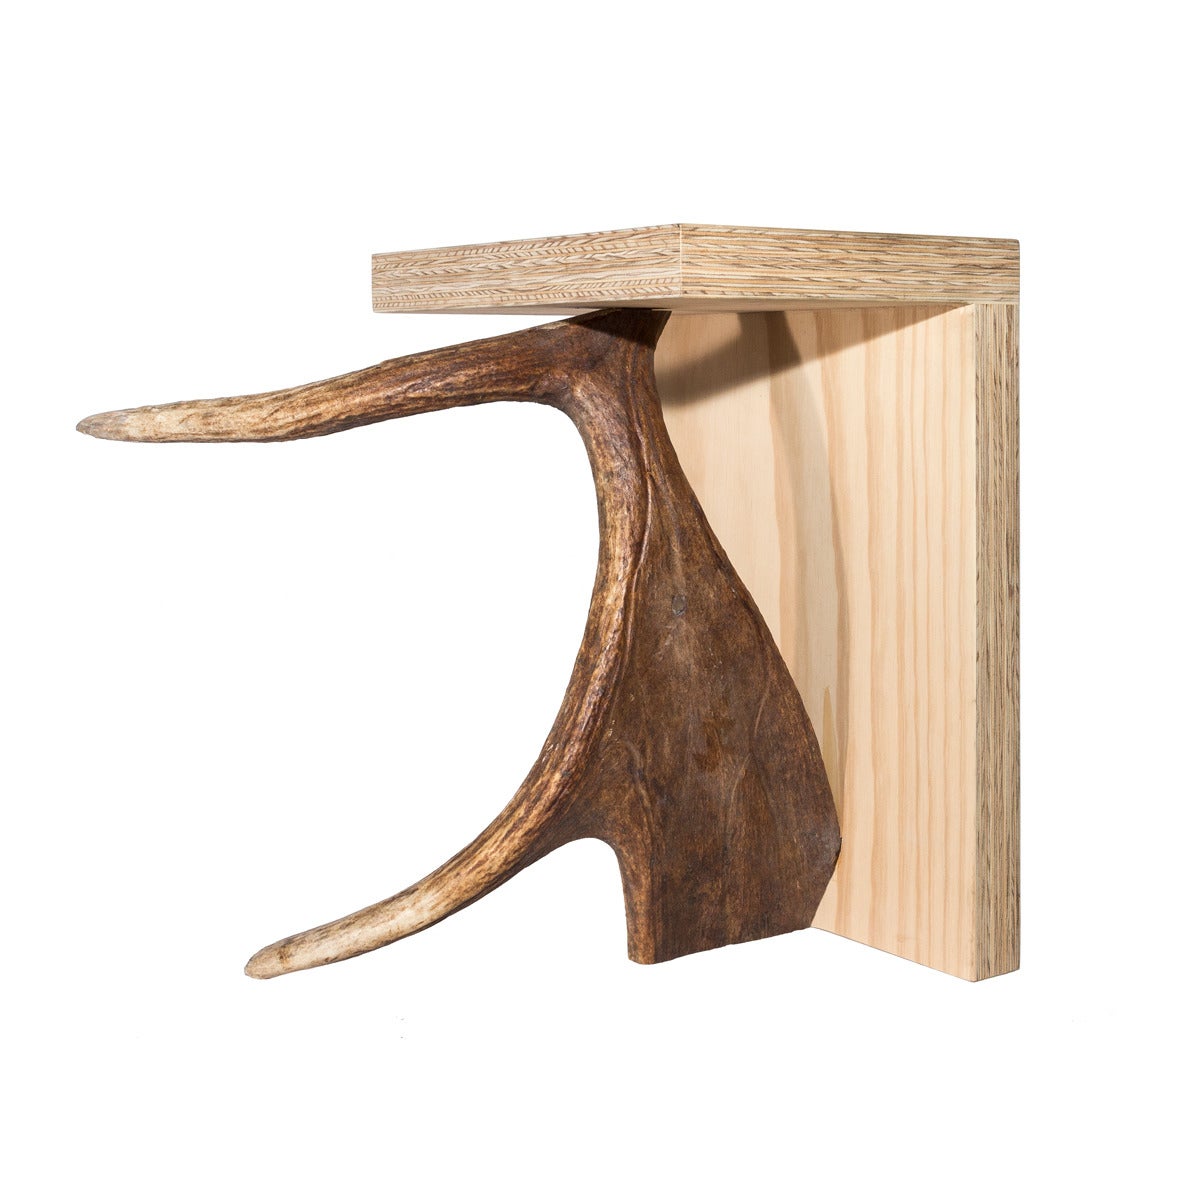 Created by world famous fashion designer Rick Owens in collaboration with his partner Michel Lamy, the stag T stool by Rick Owens Home collection is one of LMD or studio's most in demand items.

The stag T stool consists of a perpendicular